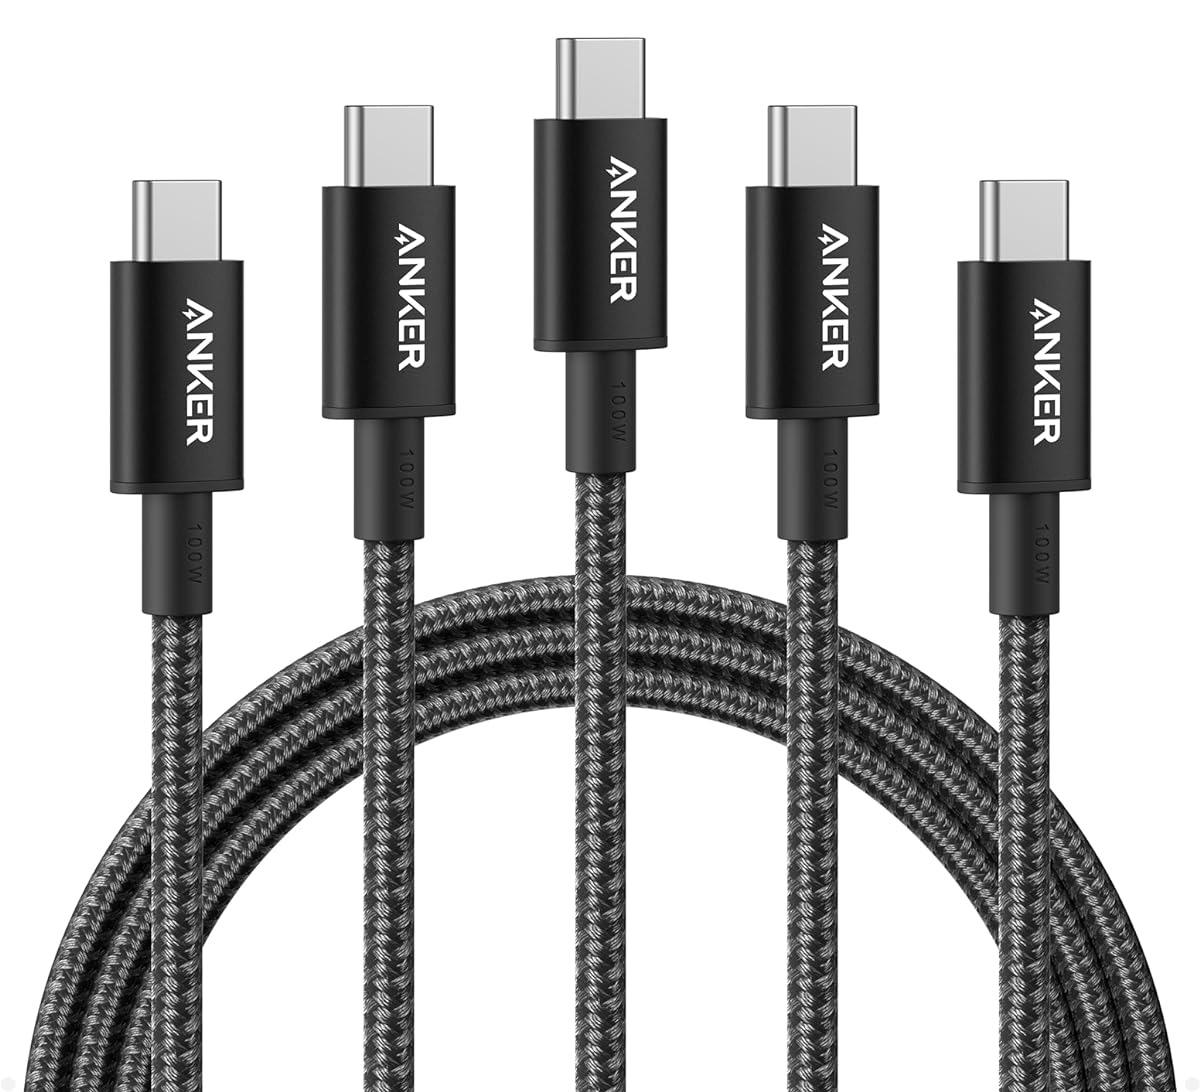 Anker USB C Charger Cable 6ft 100w 5 Pack for $18.99